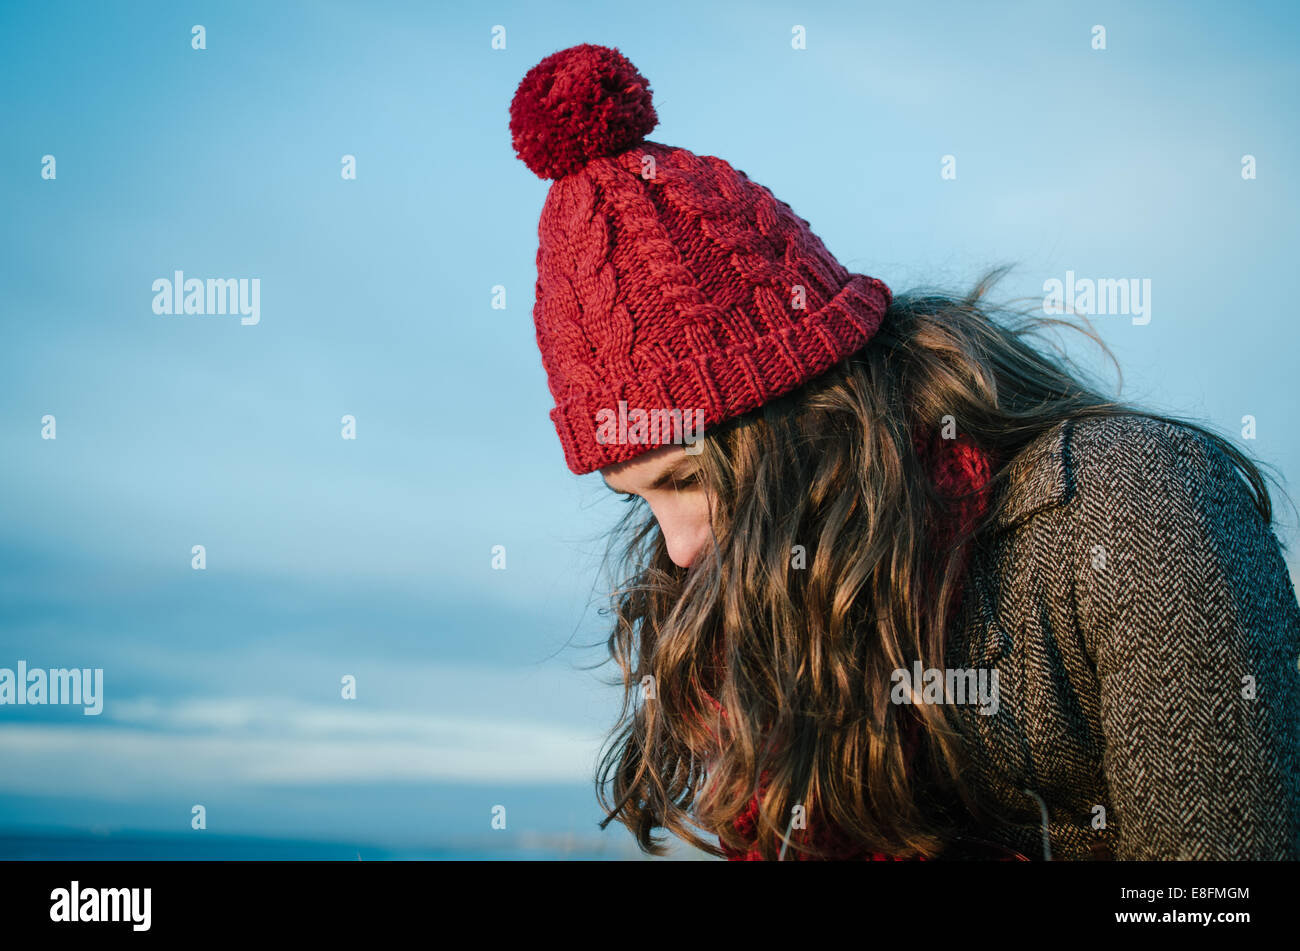 Portrait of woman looking down, Netherlands Stock Photo